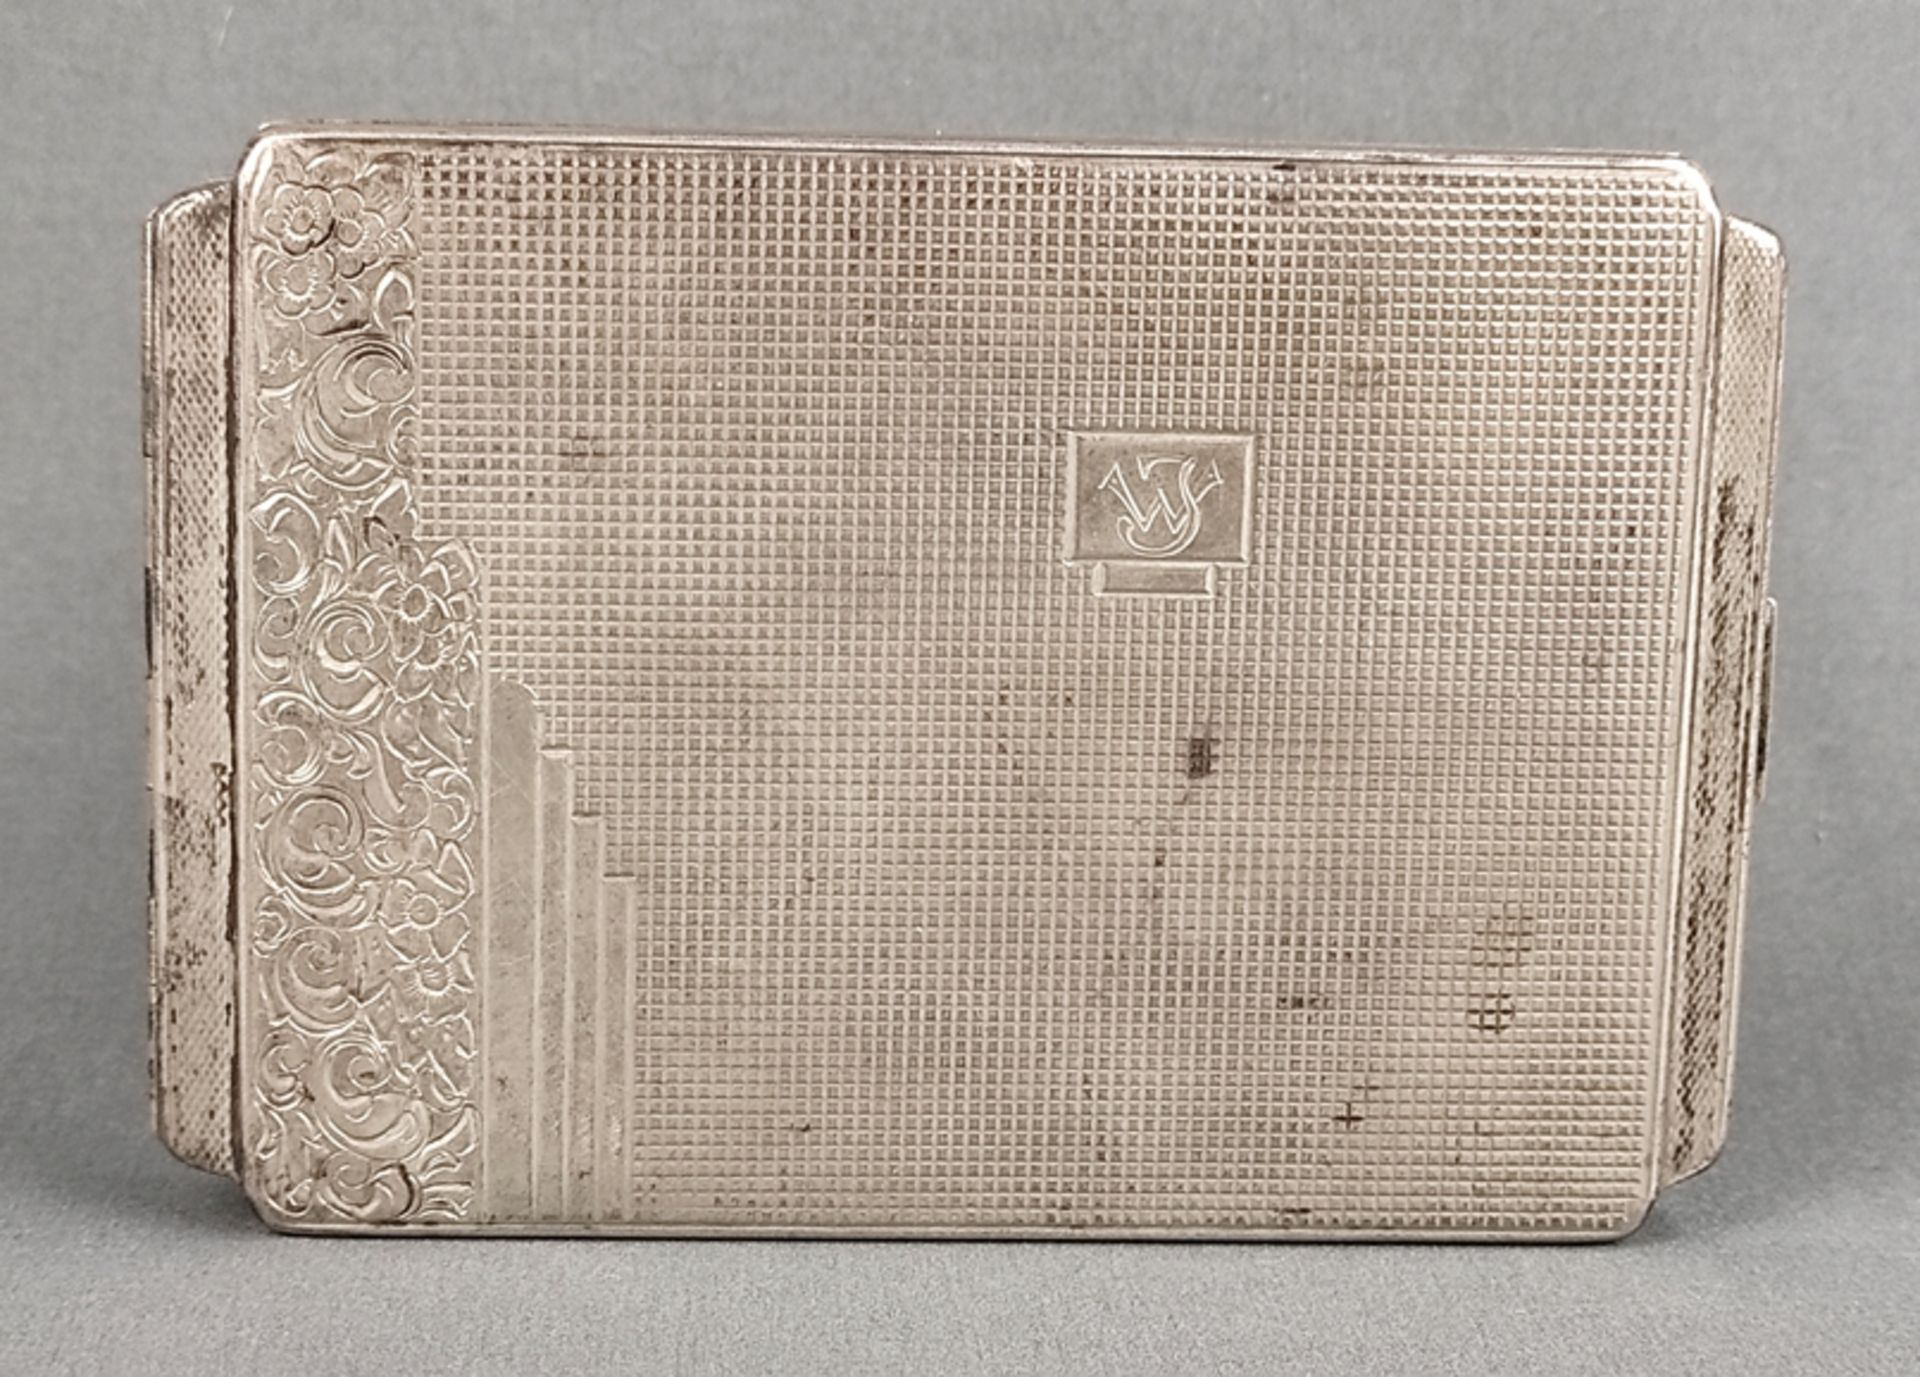 Cigarette case with monogram "WJ", with textured surface and engraved floral decoration, gilded int - Image 3 of 5